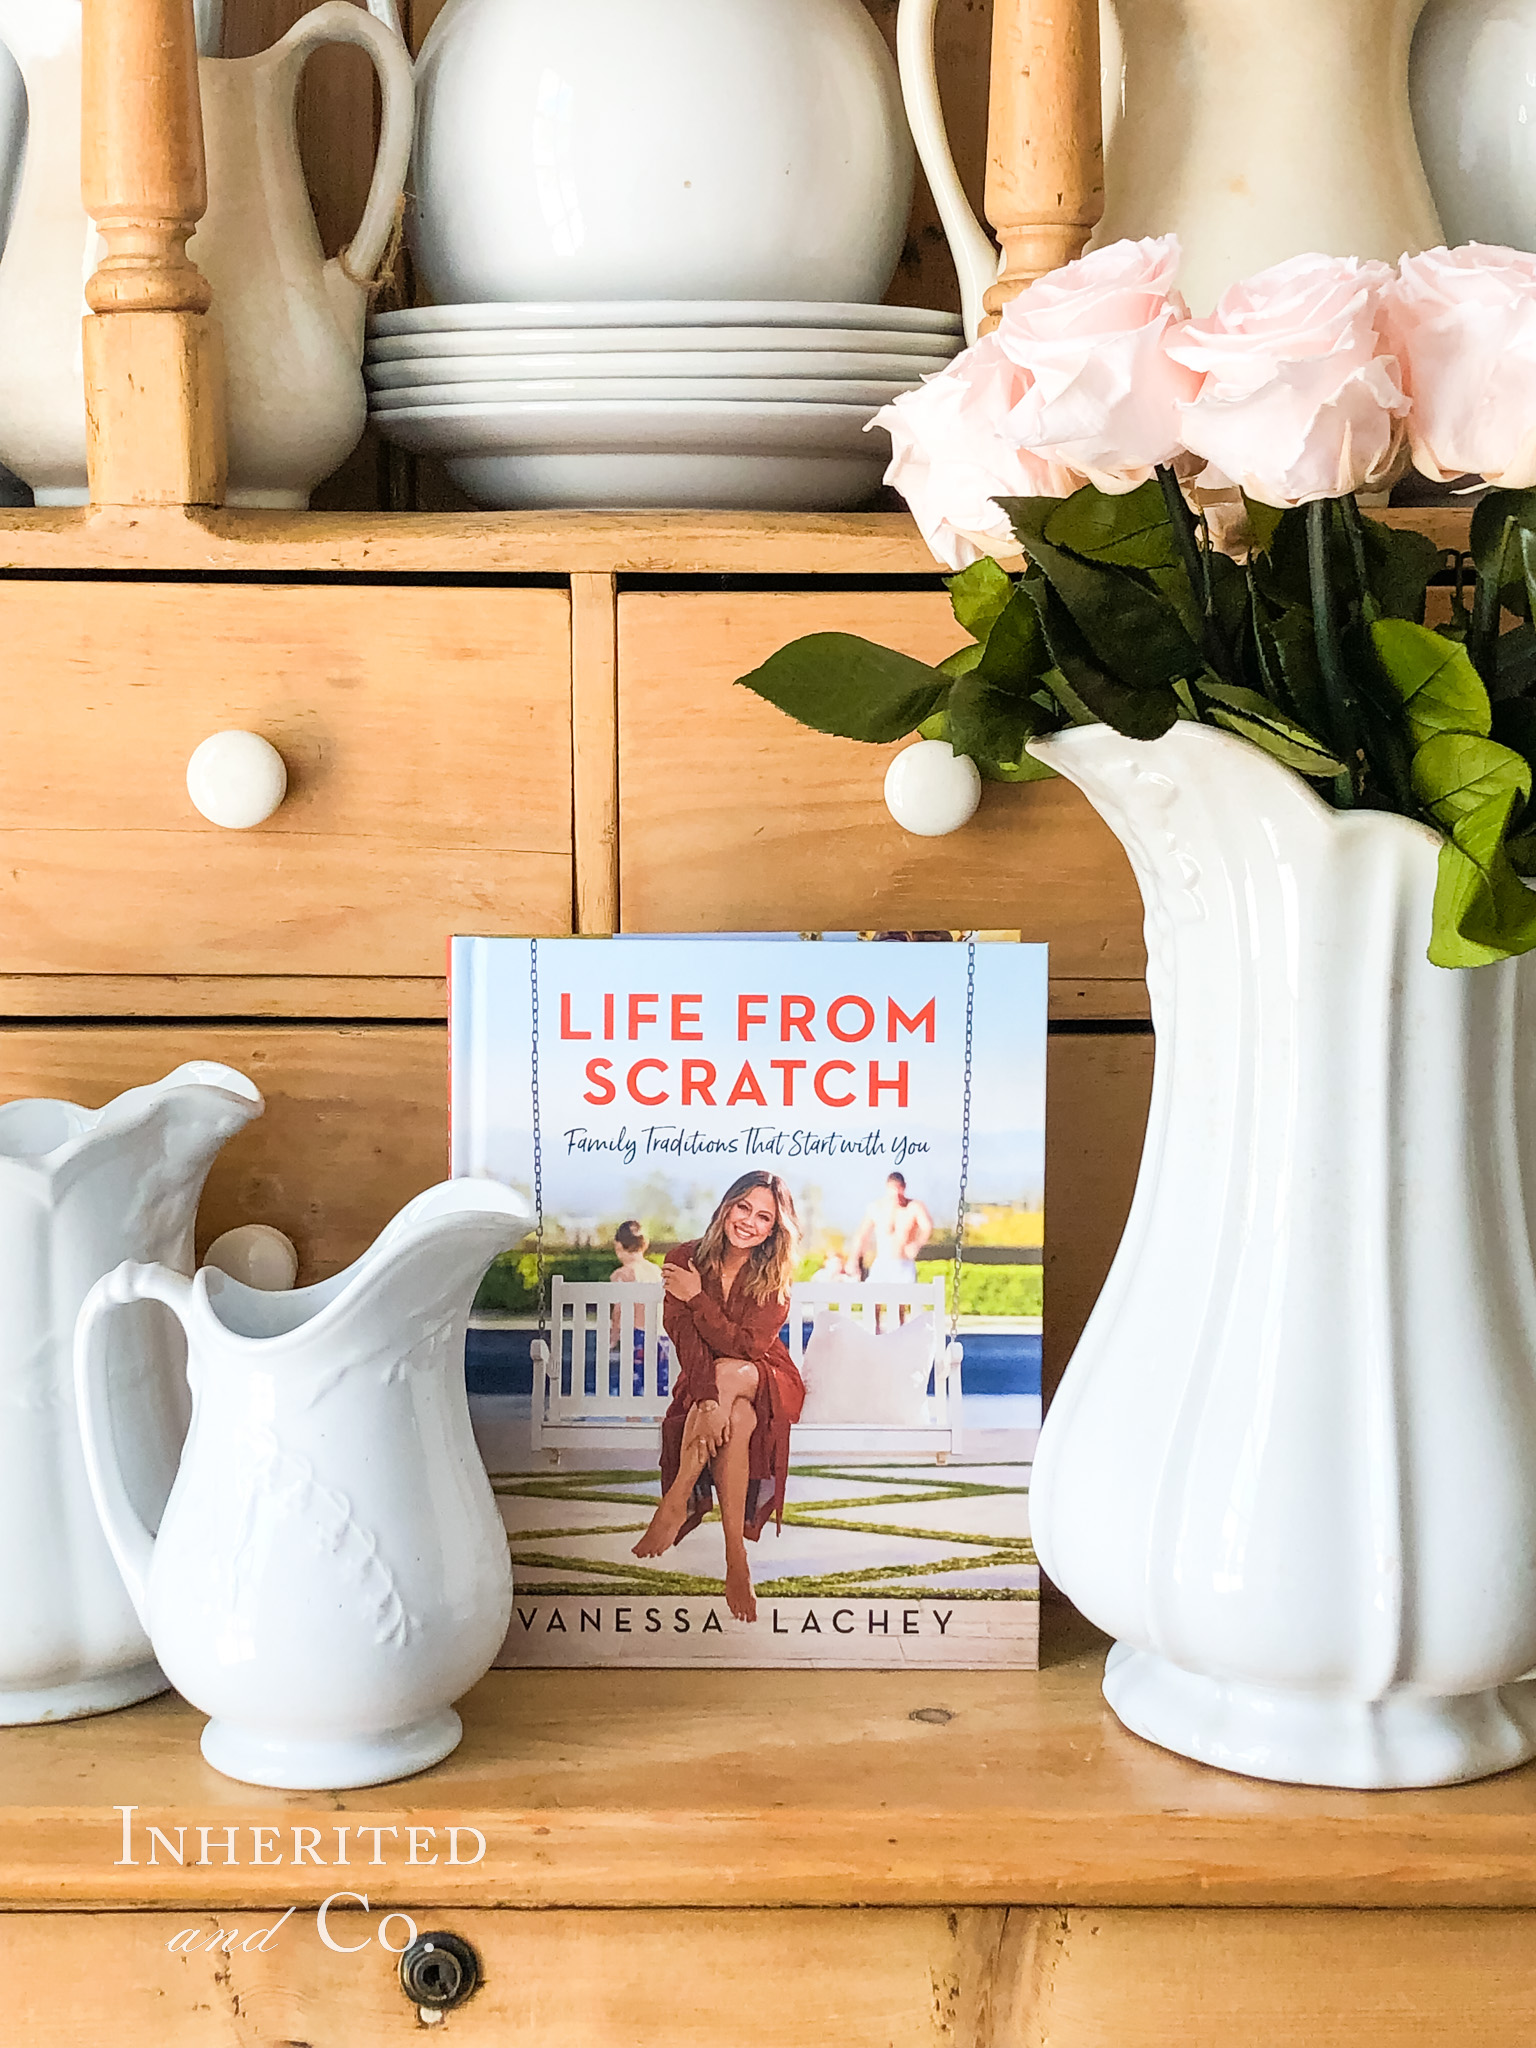 Vanessa Lachey's book, Life from Scratch, surrounded by antique ironstone and pine